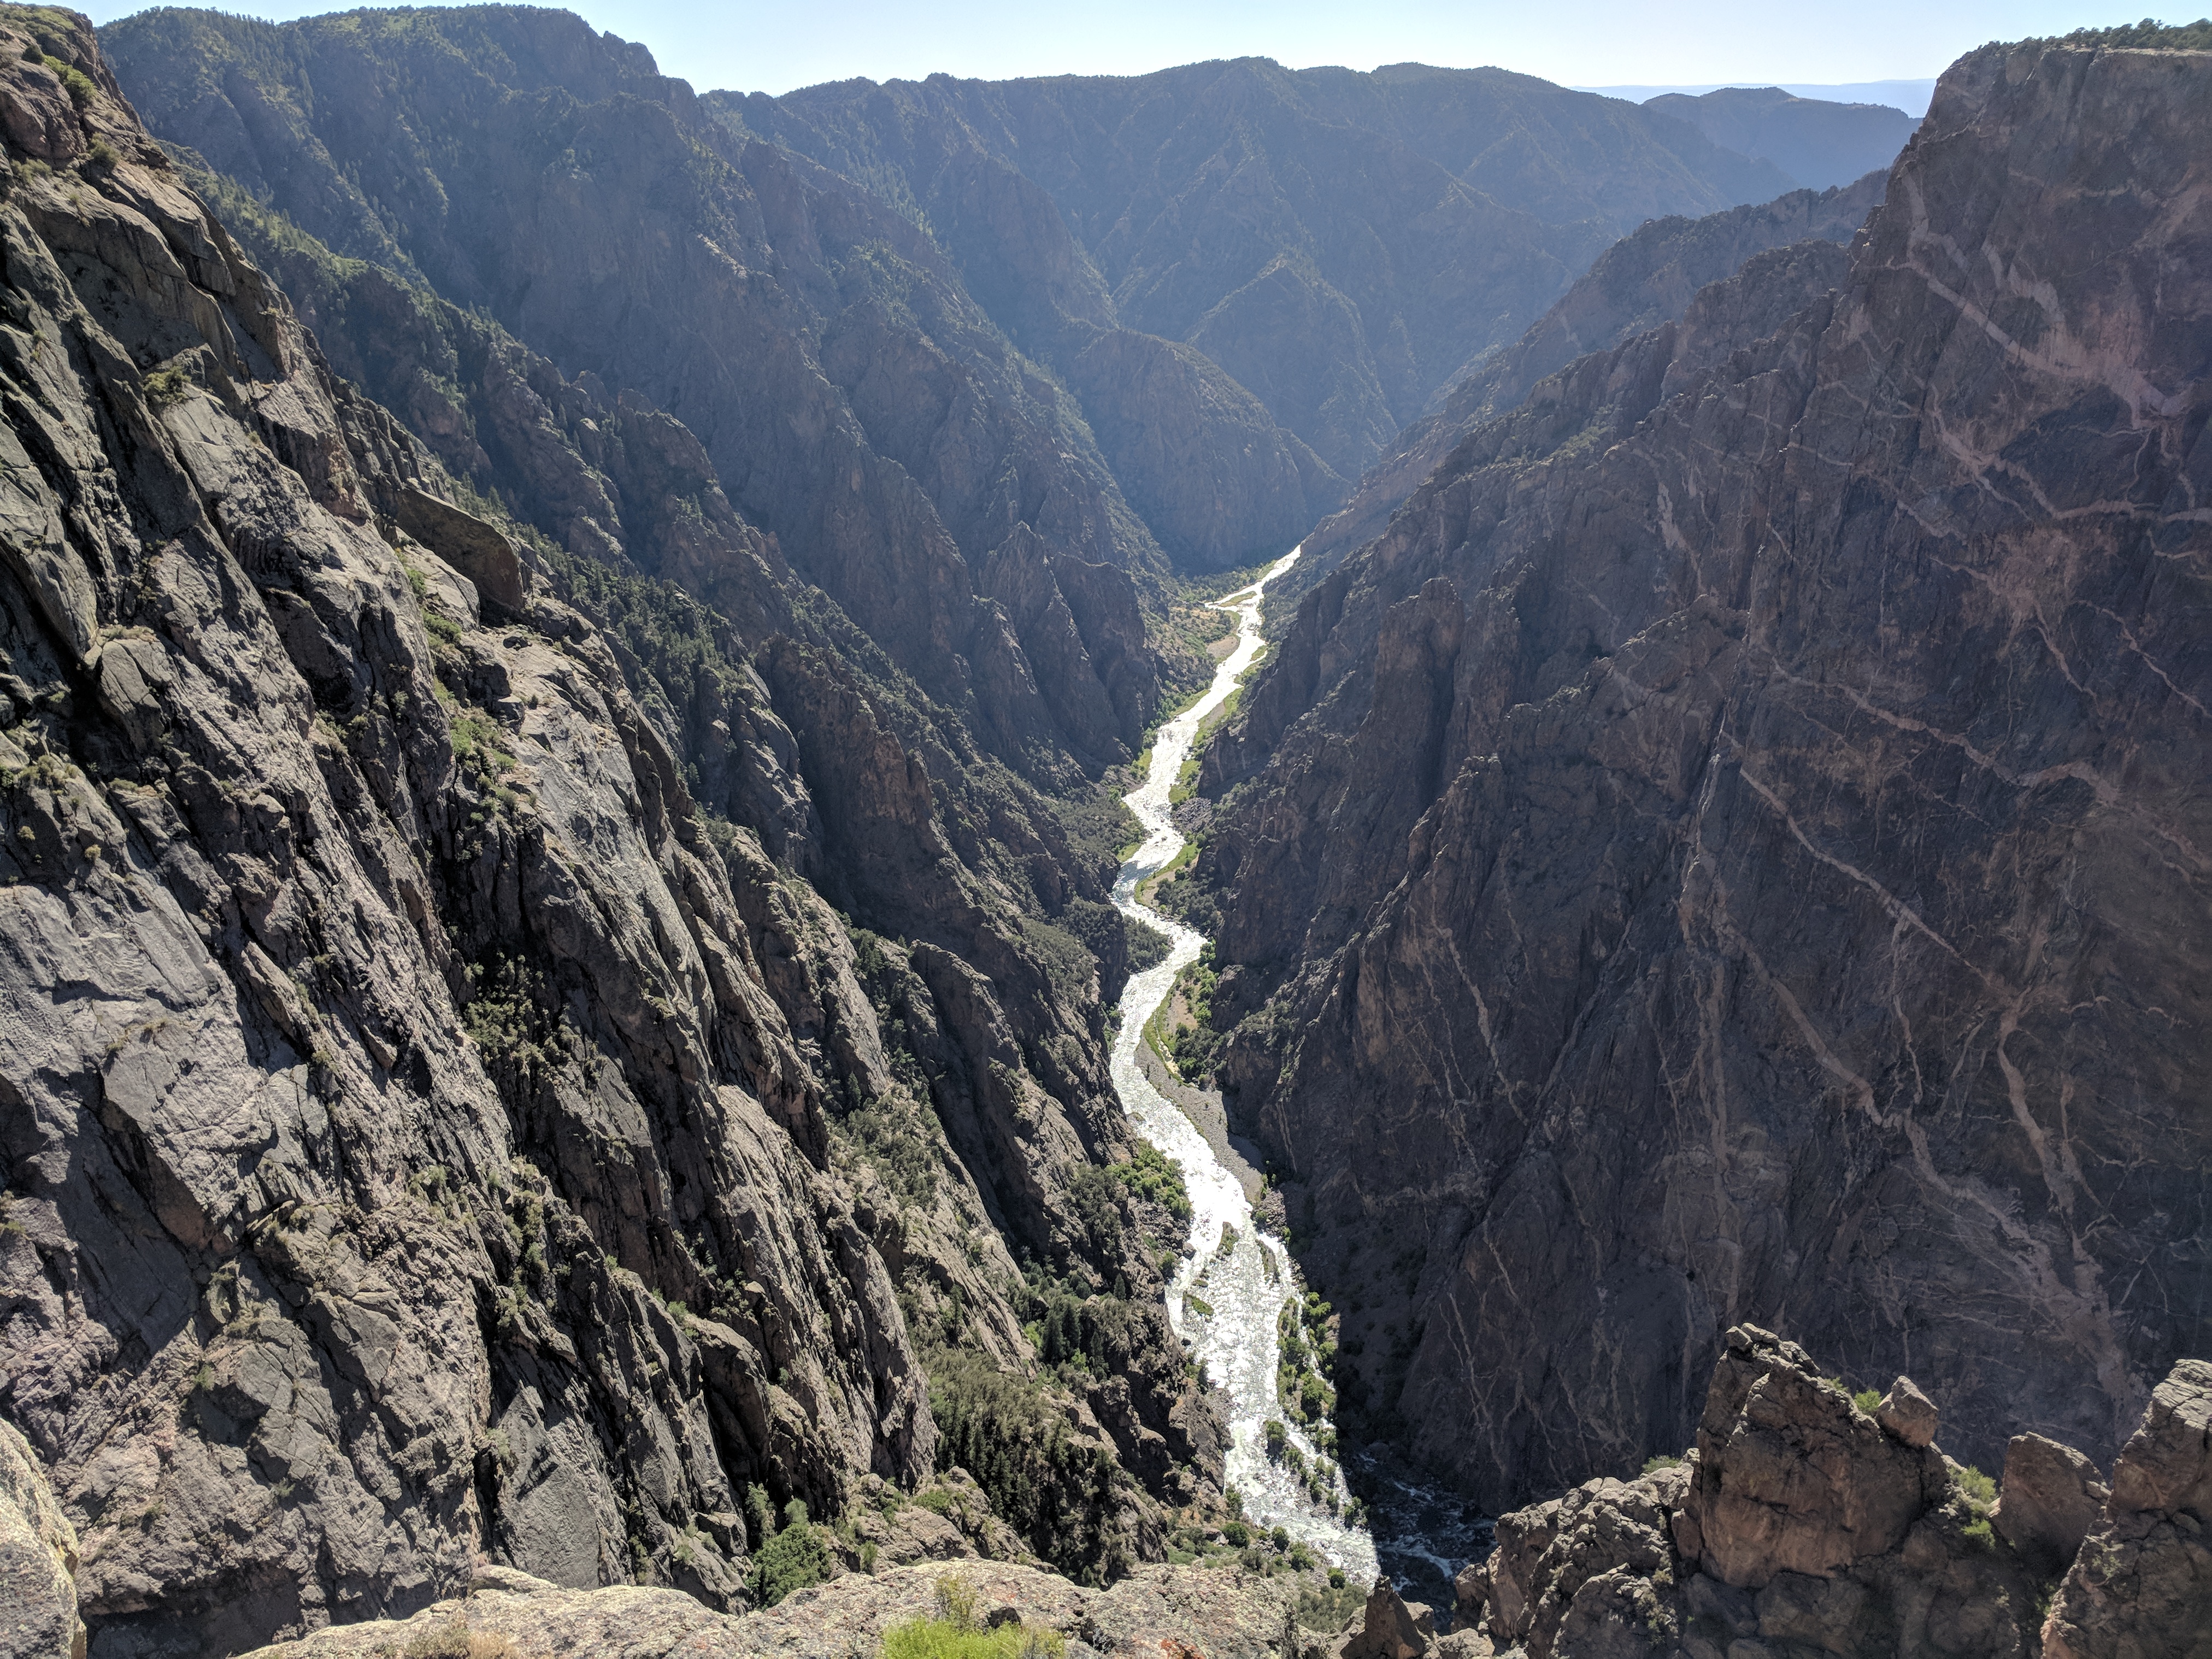 Black Canyon and the Gunnison River